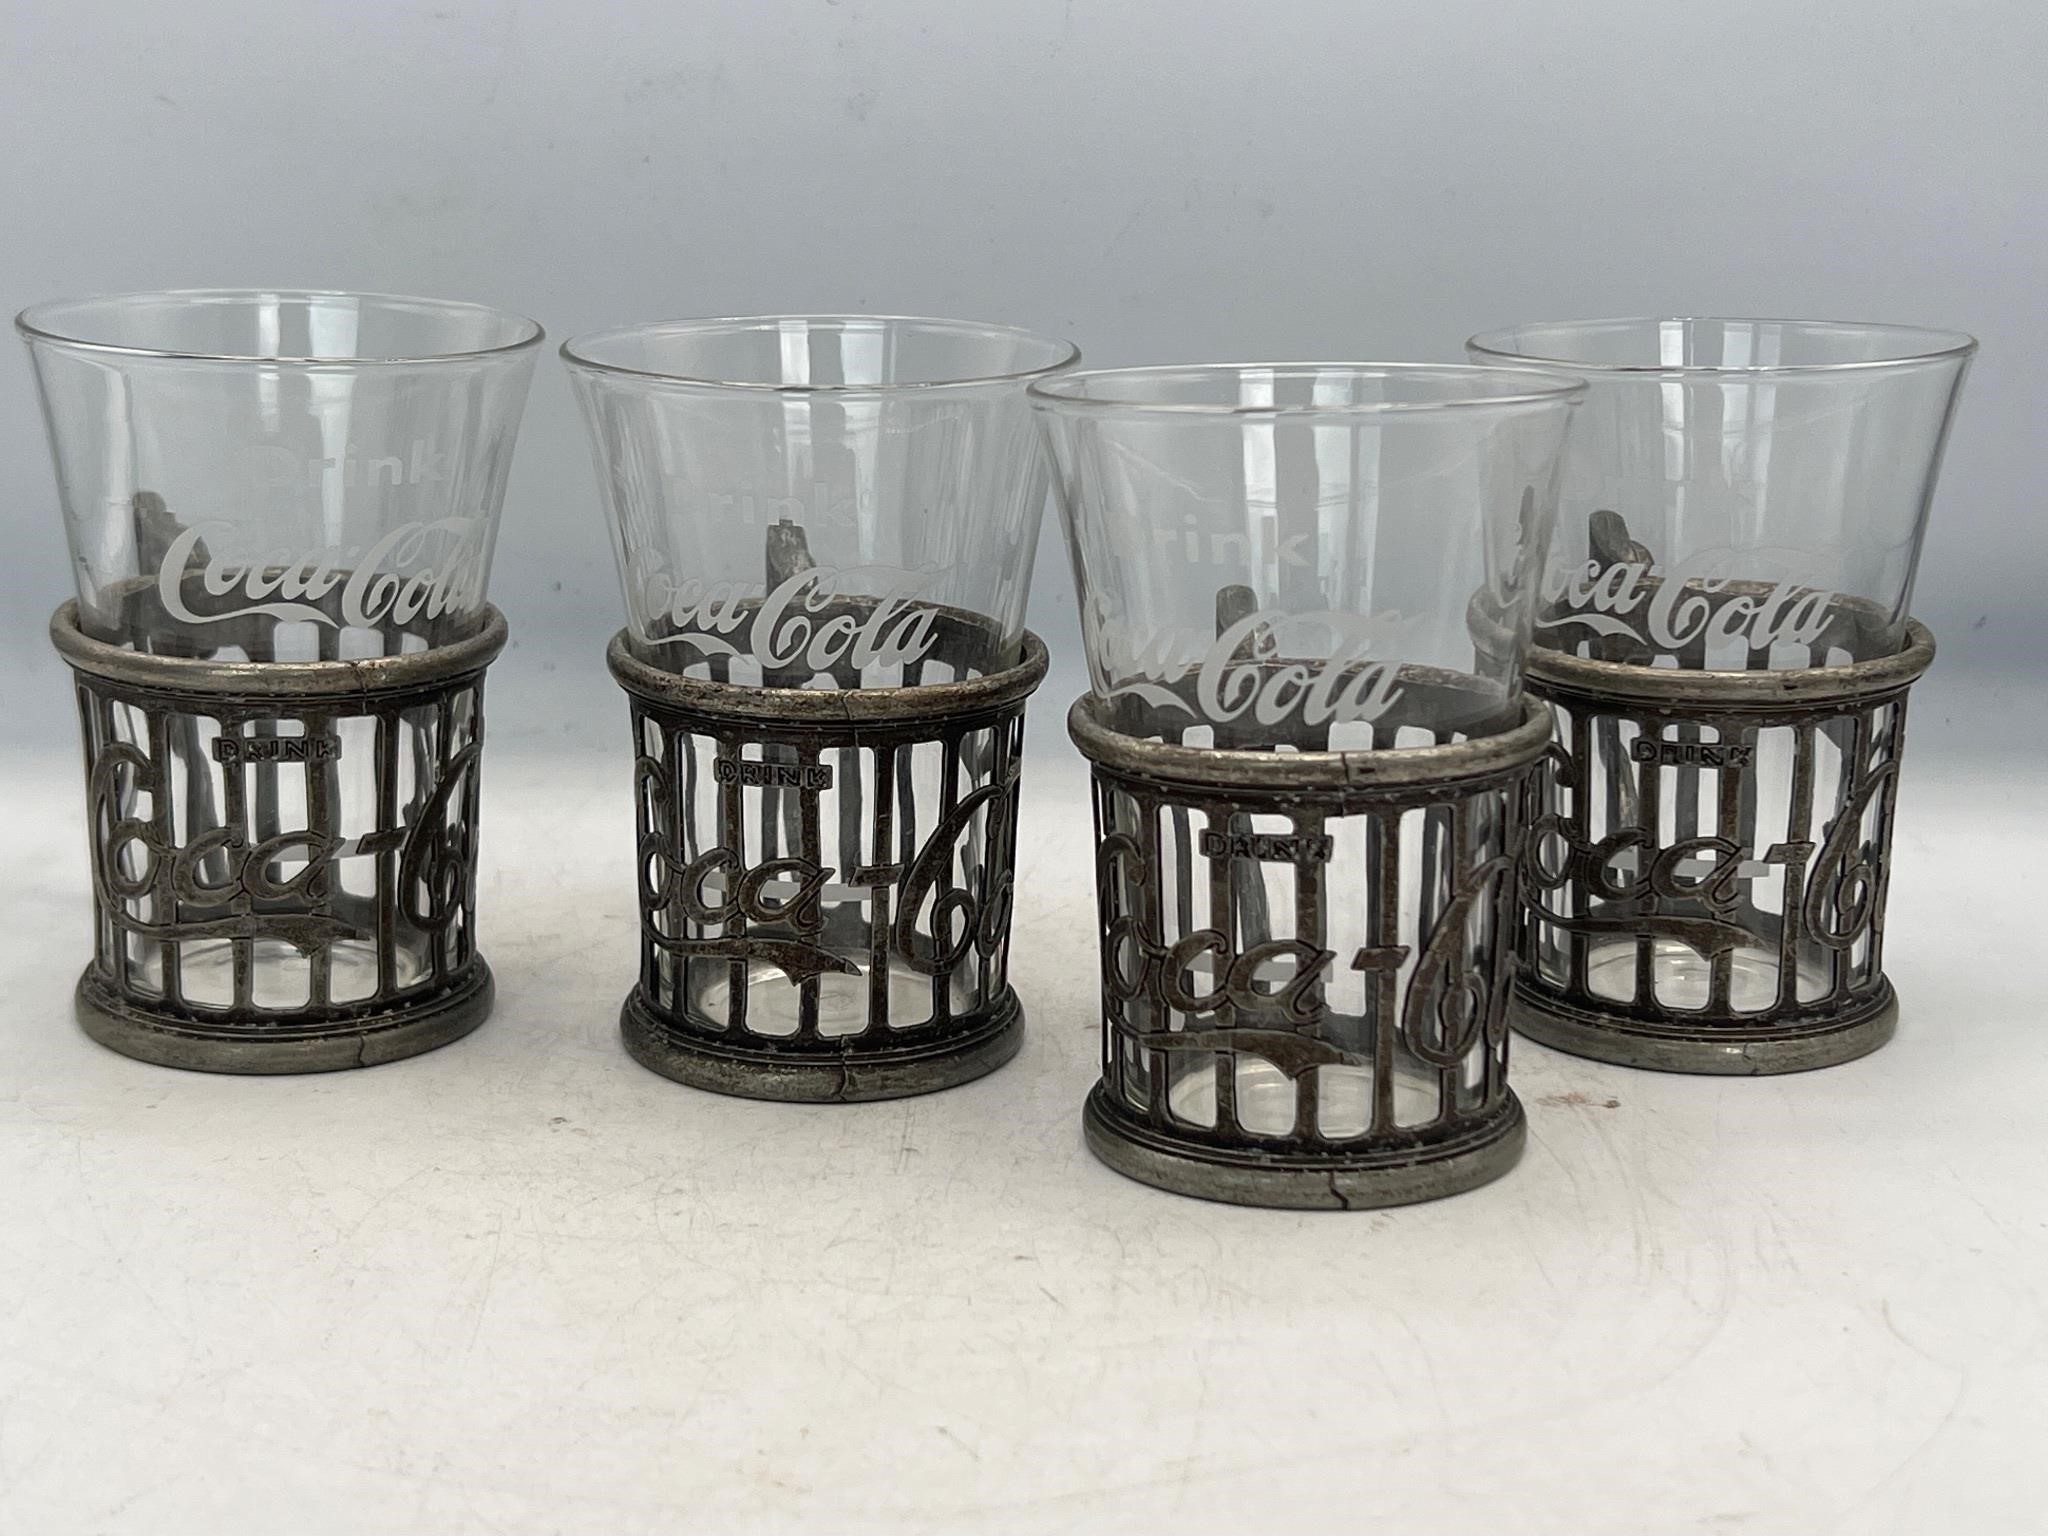 1940s Coca Cola Fountain Glass Caged Metal Holder